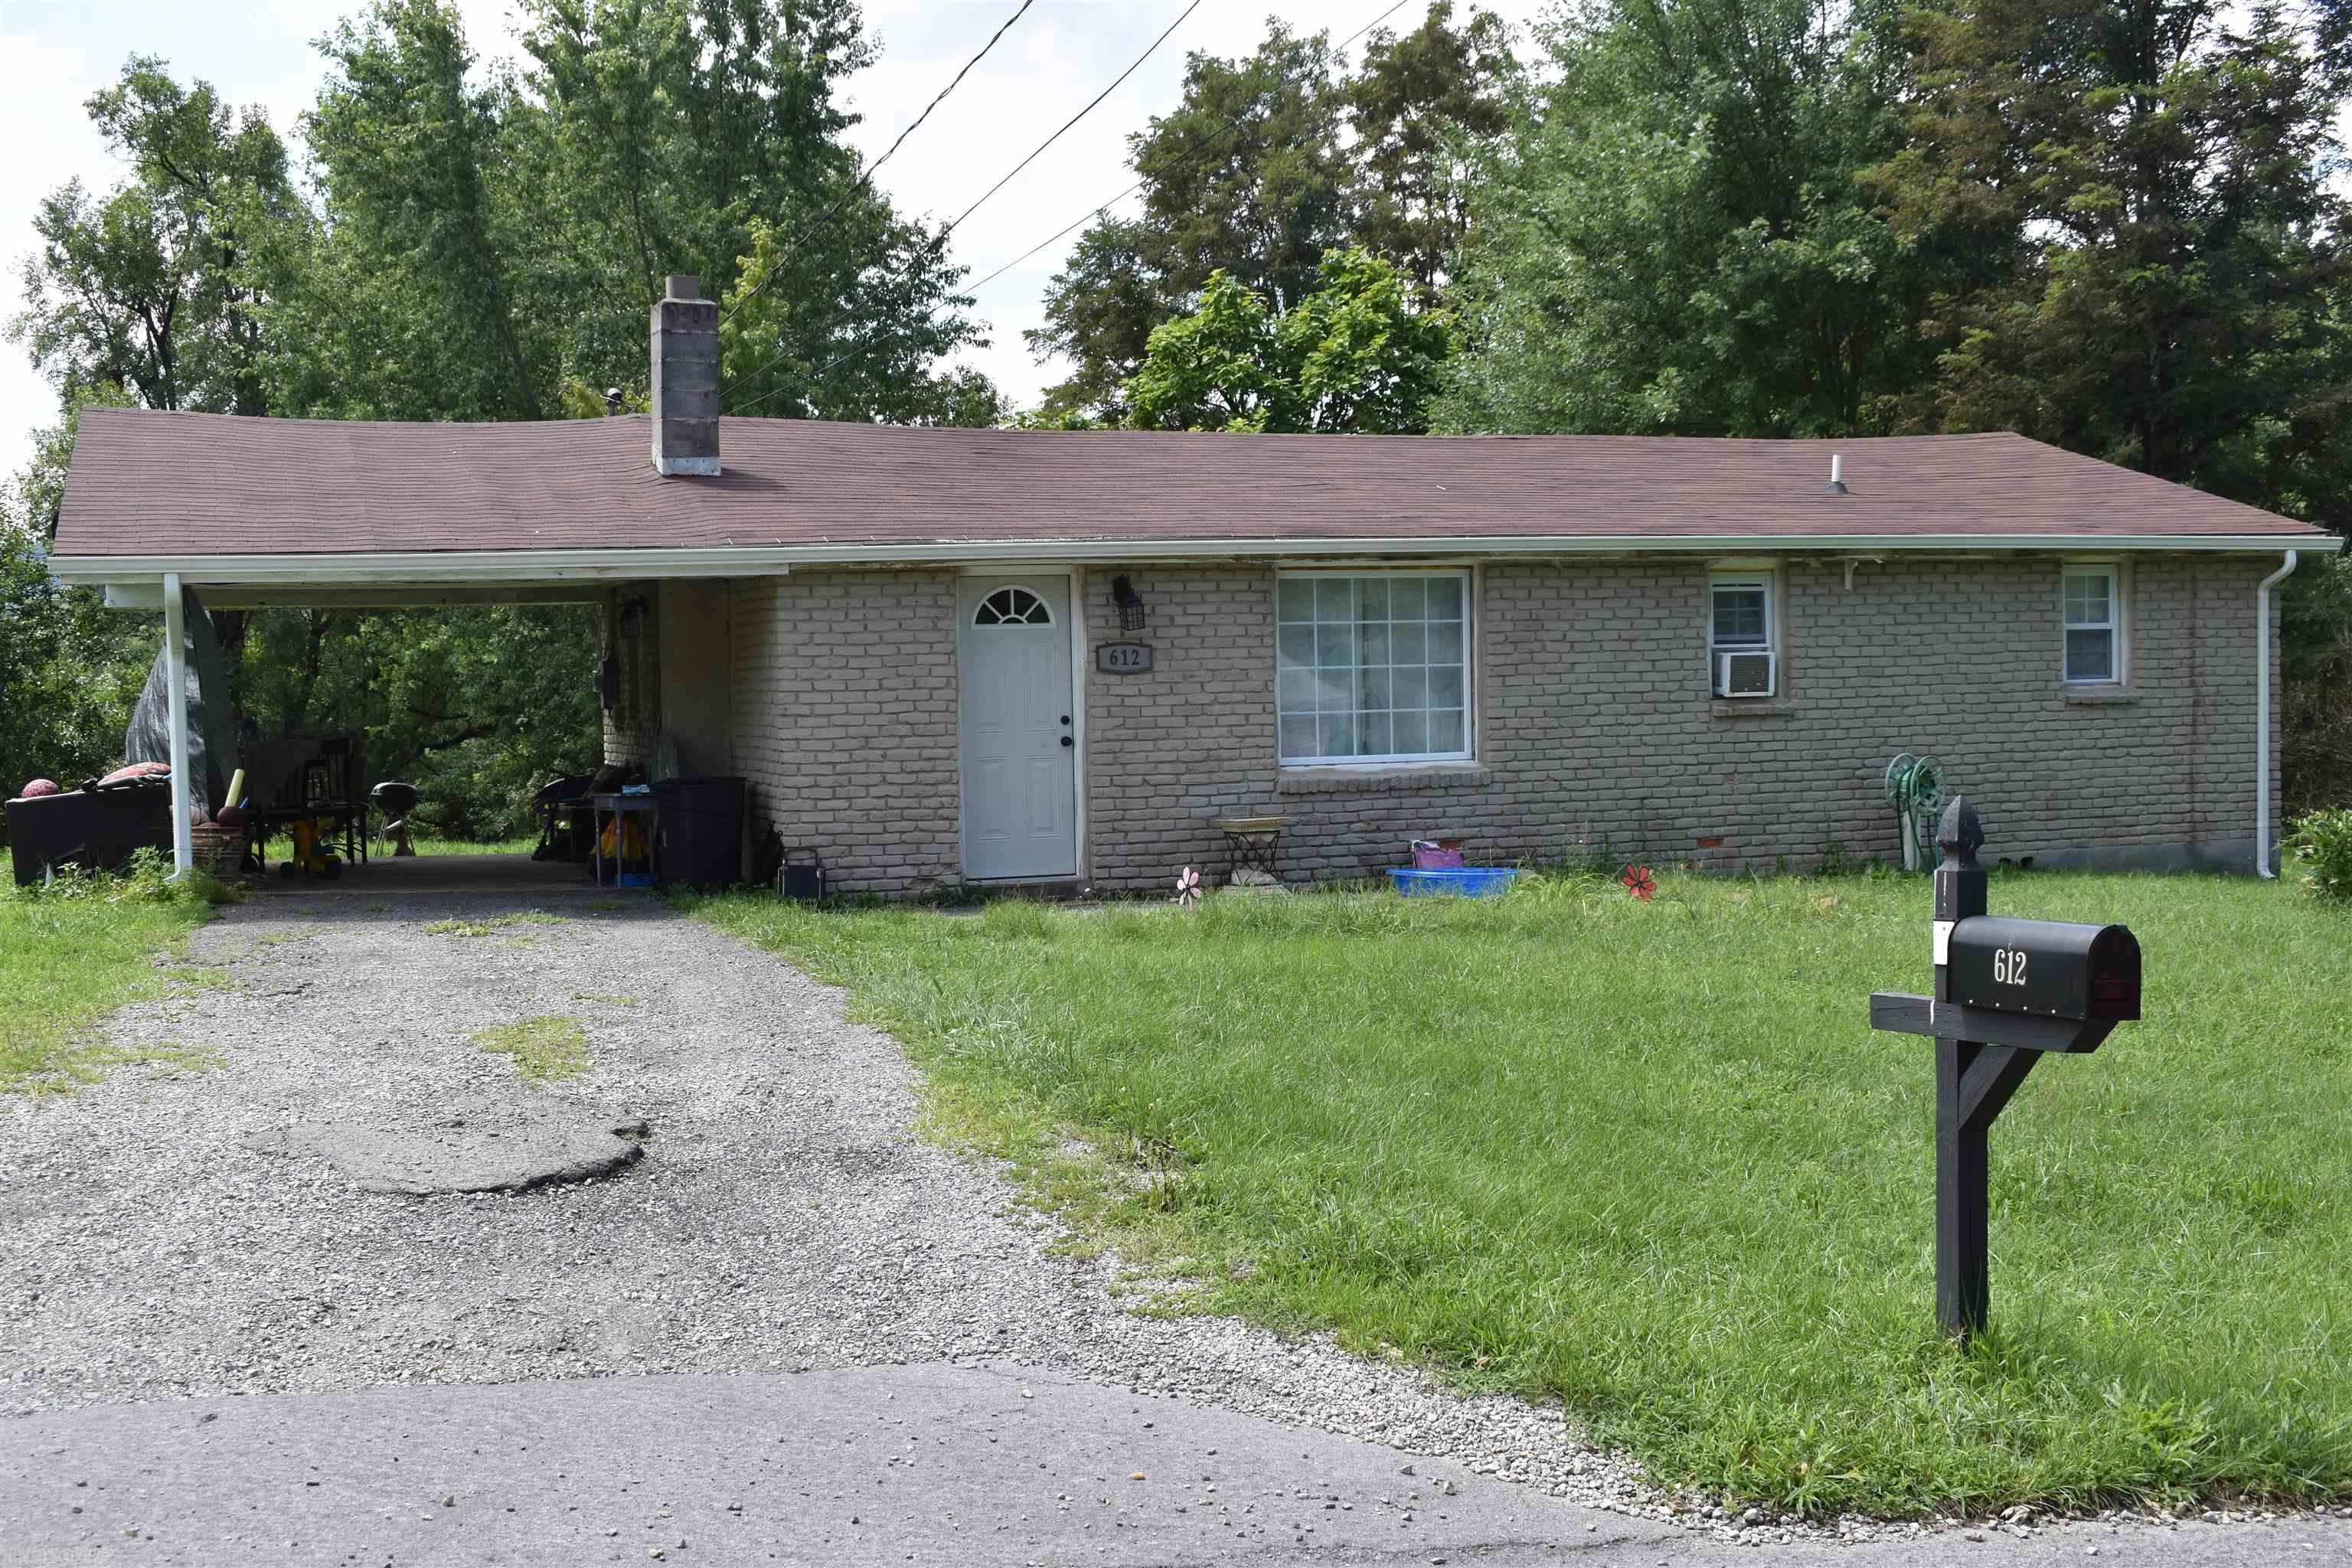 incredible, 3 bed brick ranch, with nice level lot, space for garden, carport, mature trees, house has some upgrades, vinyl plank flooring, up graded appliances, close to shopping. nice investment property.